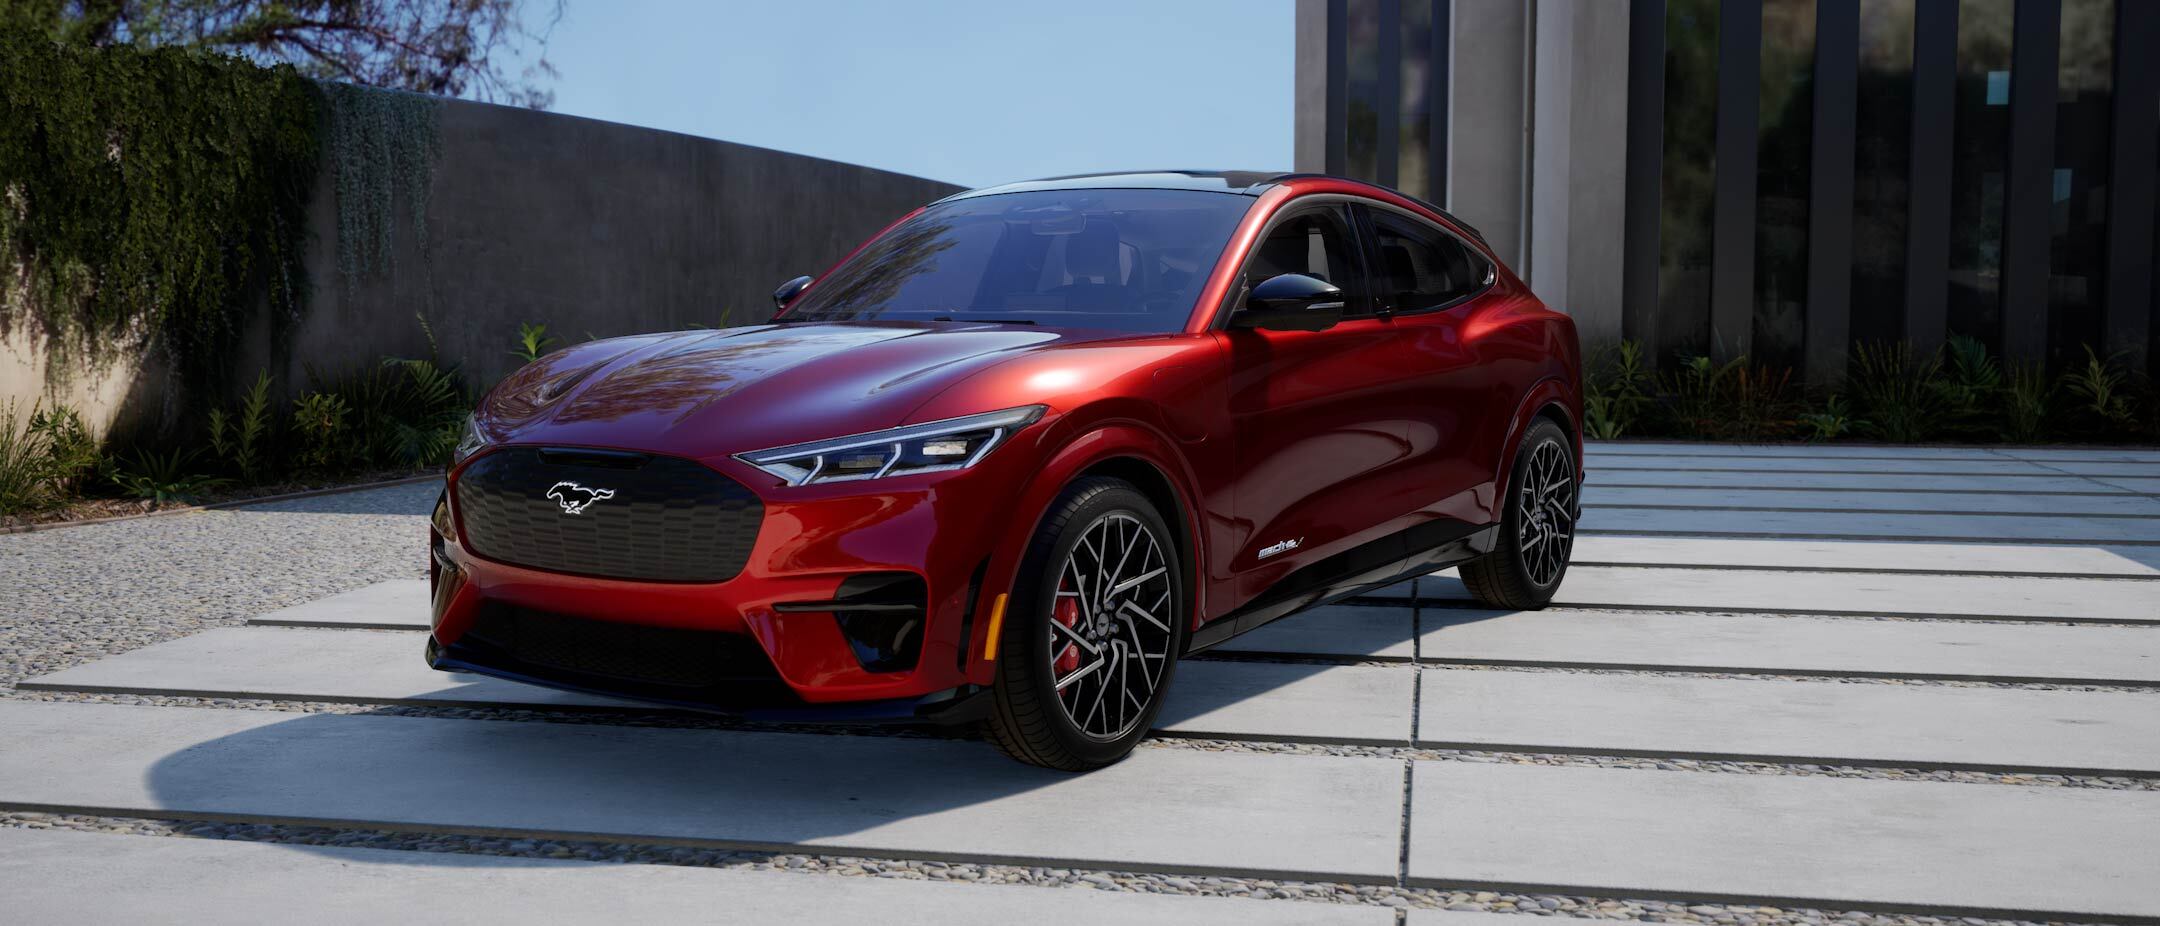 The 2022 Ford Mustang Mach-E Sport is one of the best electric SUVs. Reserve a test drive of the latest Mustang Mach-E at your local Ford dealership AutoFair Ford in Manchester, Manchester, New Hampshire.